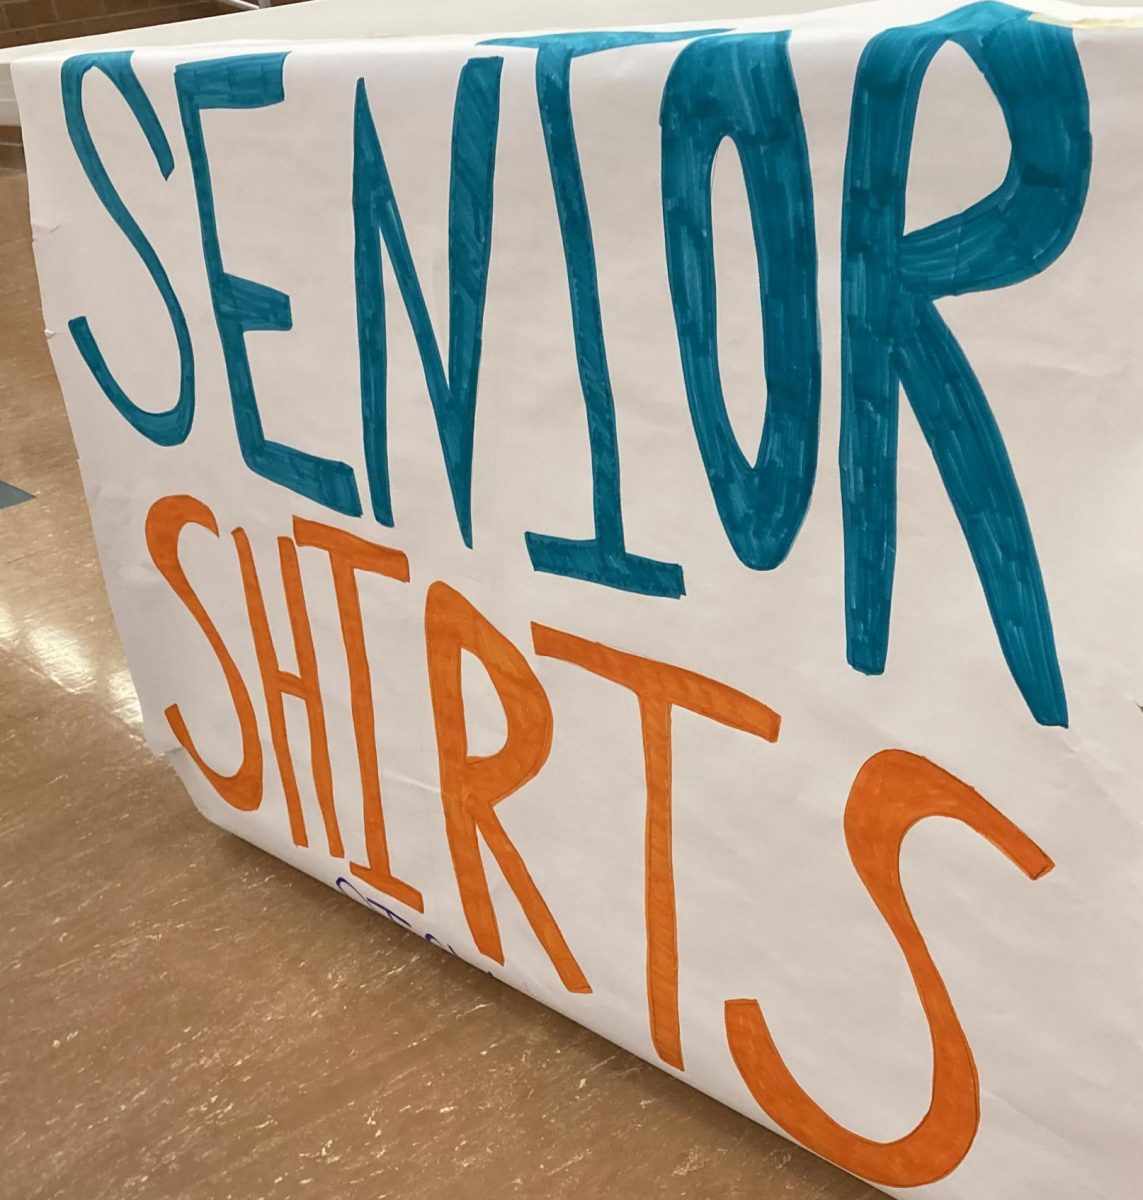 Student Council sets up a booth for seniors to pick up their senior shirts. From Wednesday, Oct. 18 to Friday, Oct. 20, senior shirts are available for pick-up by the trophy cases at the front of the school.